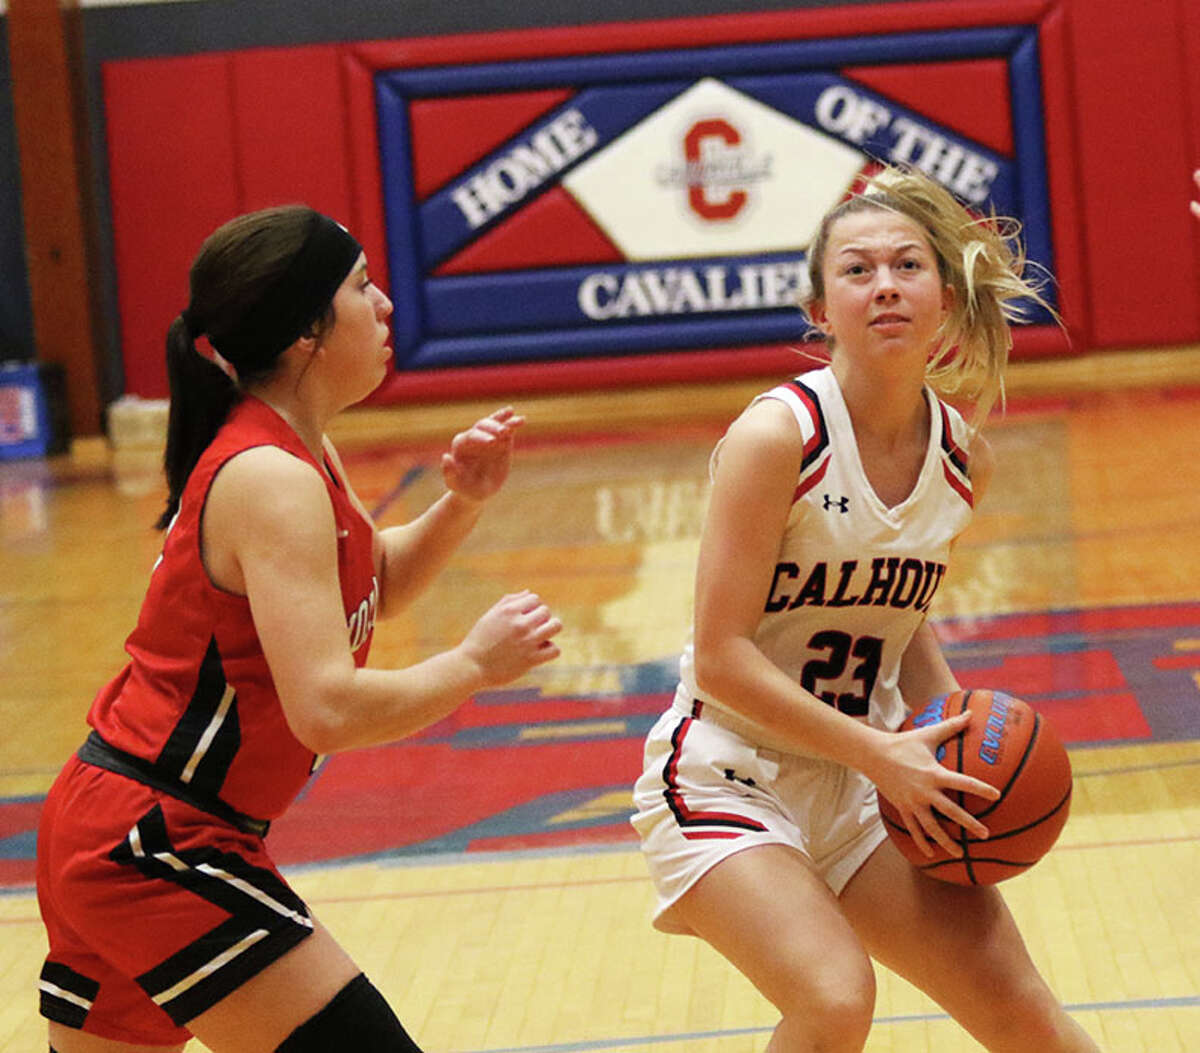 Calhoun's Jaelyn Hill (right) looks to the basket against a Nokomis defender in a game at December's Carlinville Tourney. On Tuesday, Hill had 17 points, but the Warriors lost to Gateway Legacy in a quarterfinal at the Carrollton Tourney.